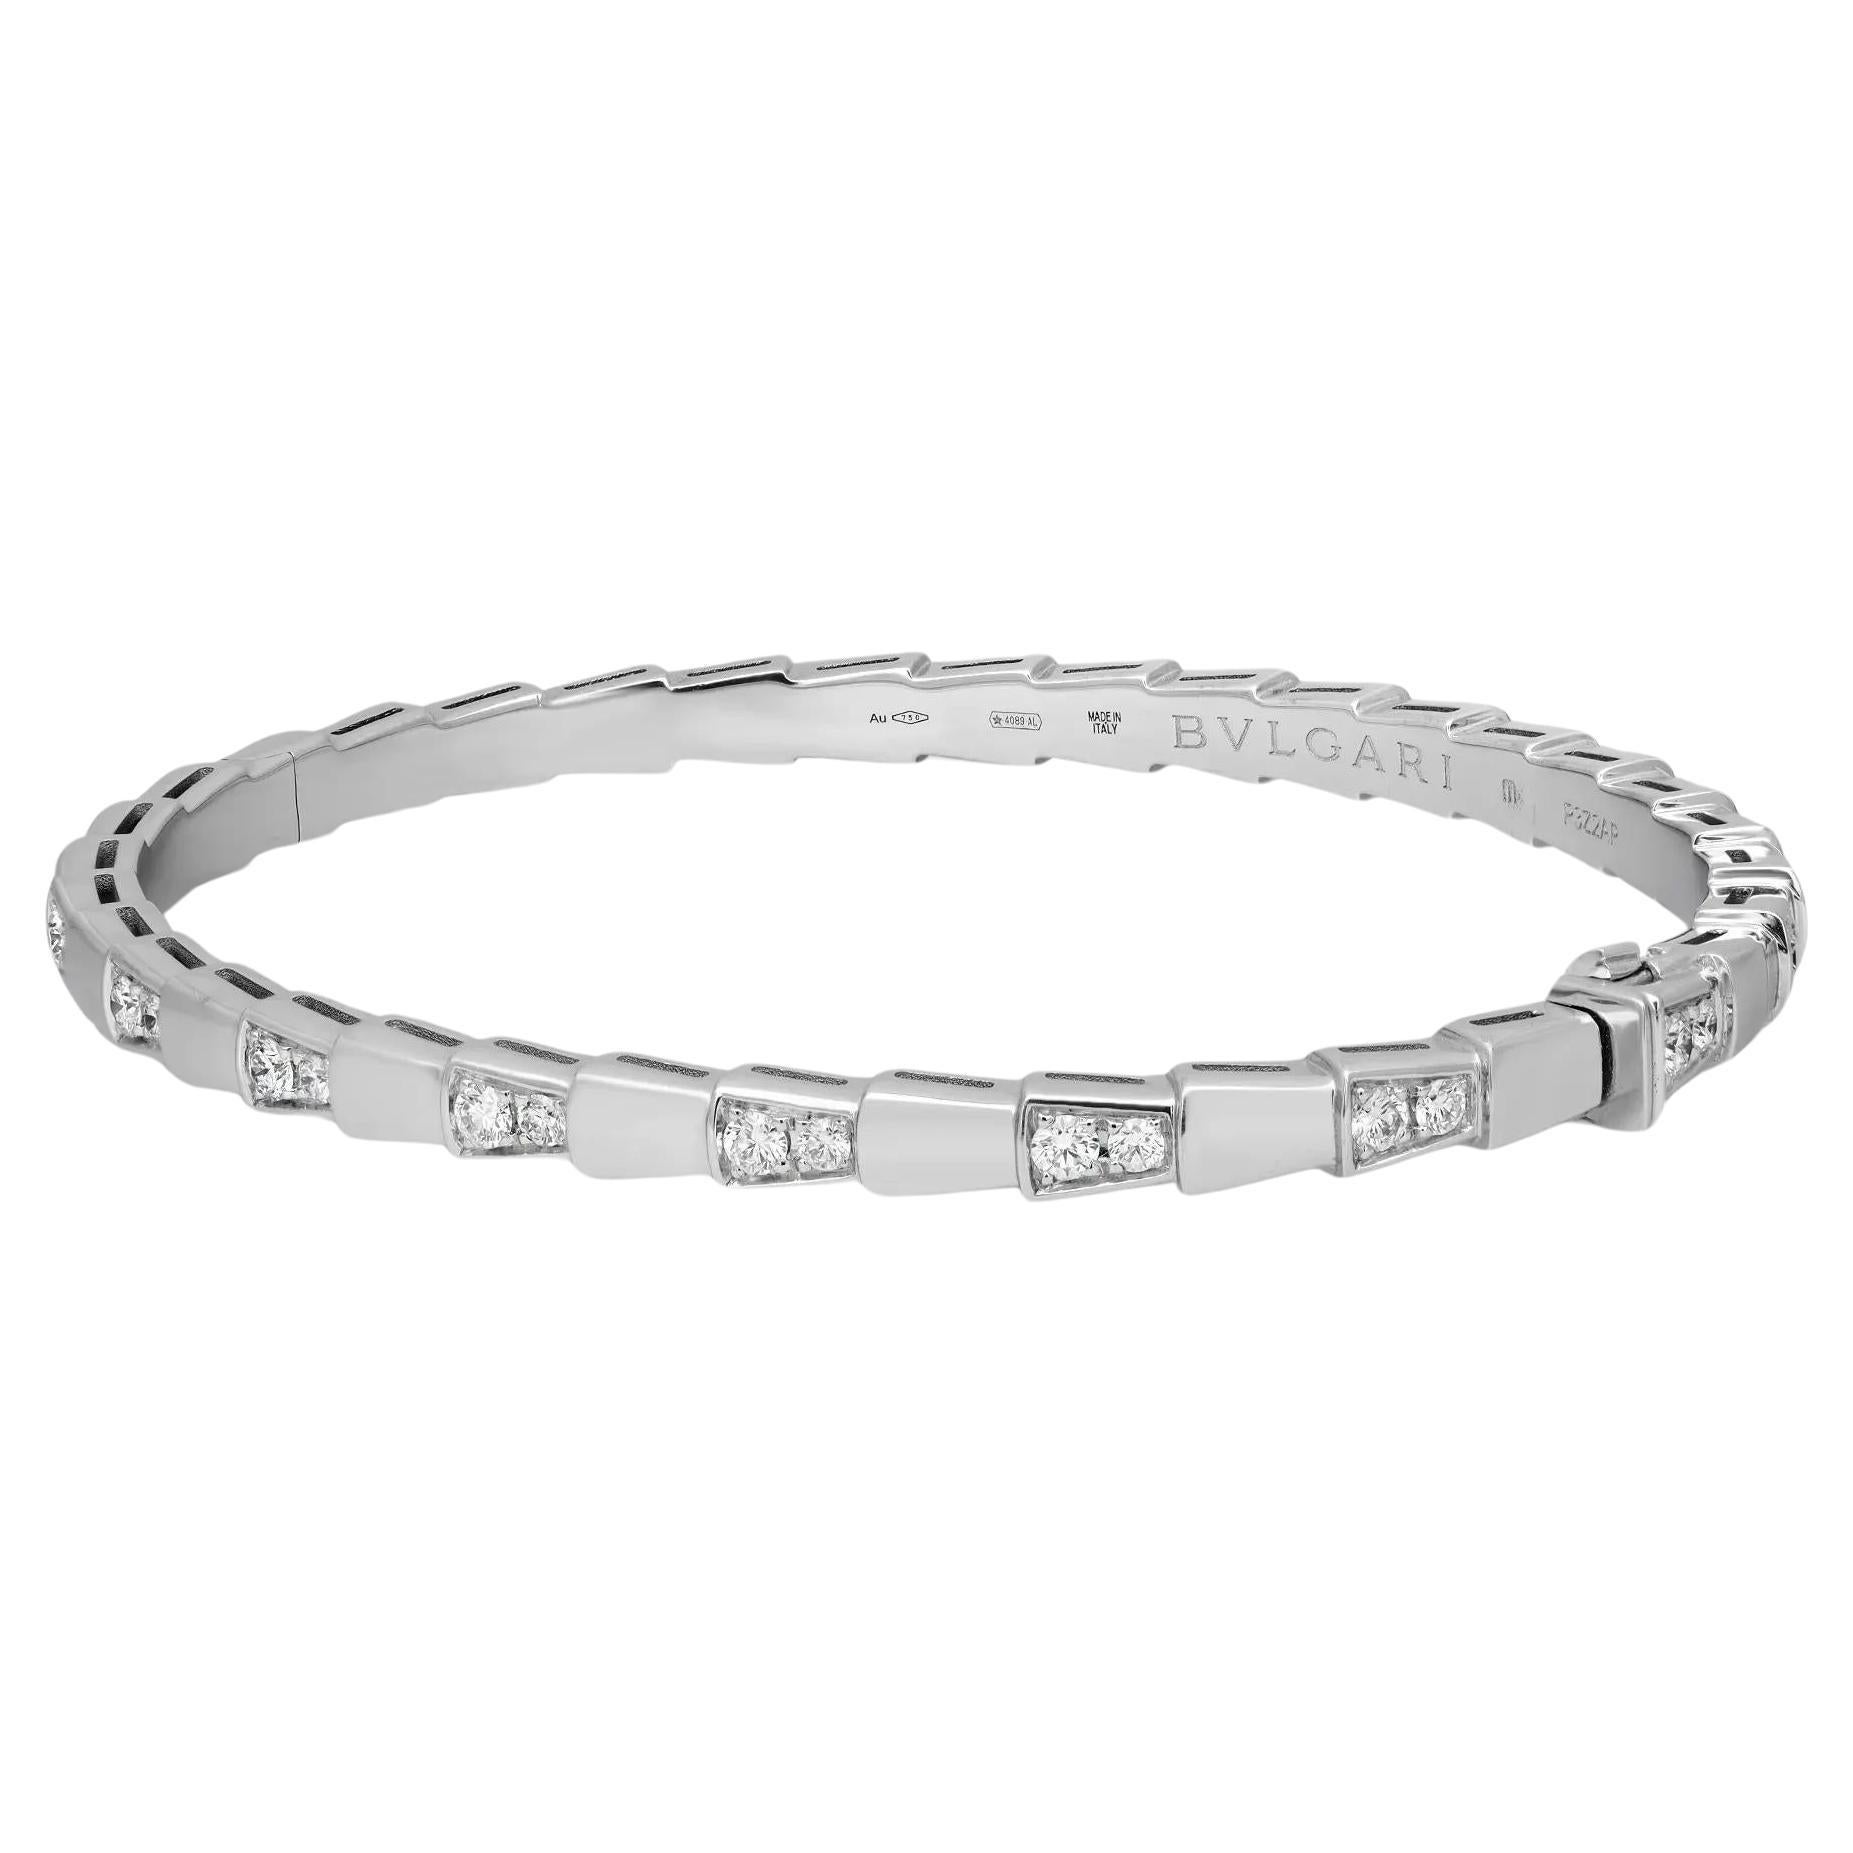 This bangle bracelet is a true statement of Bvlgari’s creative vision. Well crafted in 18K white gold. The bracelet is in the form of a serpent and beautifully alternates between high polish and diamond sections that evoke the viper's spiral move